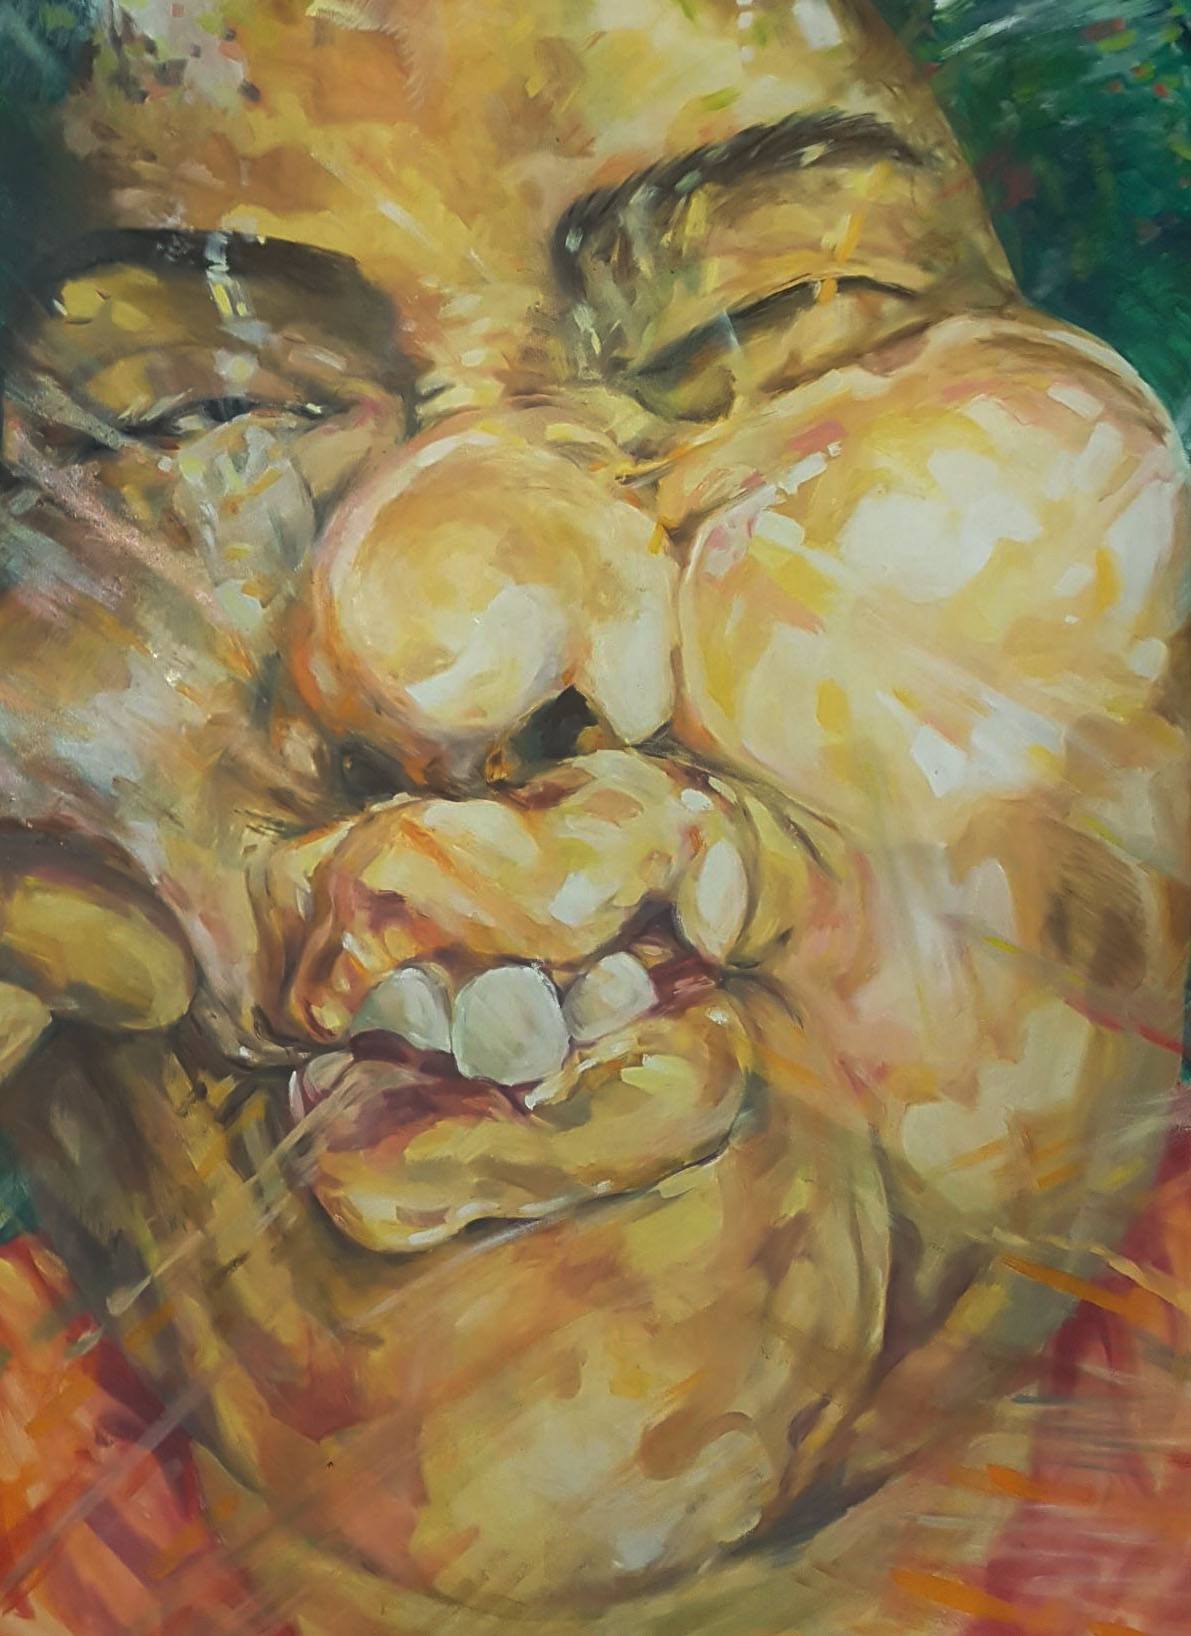 A painting of a person with plastic over their face